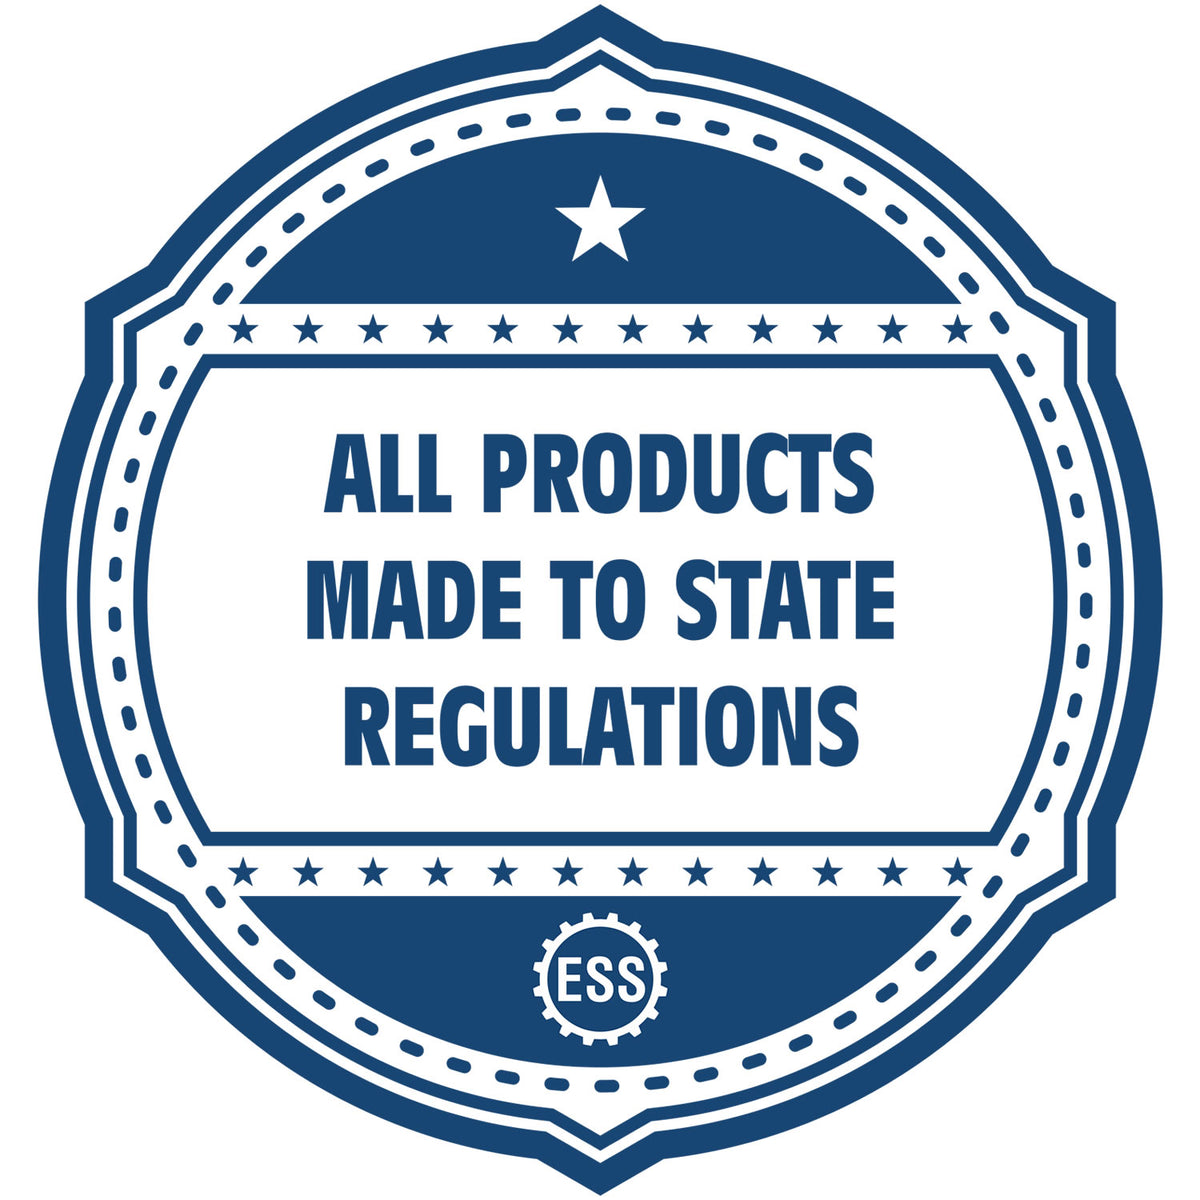 An icon or badge element for the Slim Pre-Inked Maryland Landscape Architect Seal Stamp showing that this product is made in compliance with state regulations.